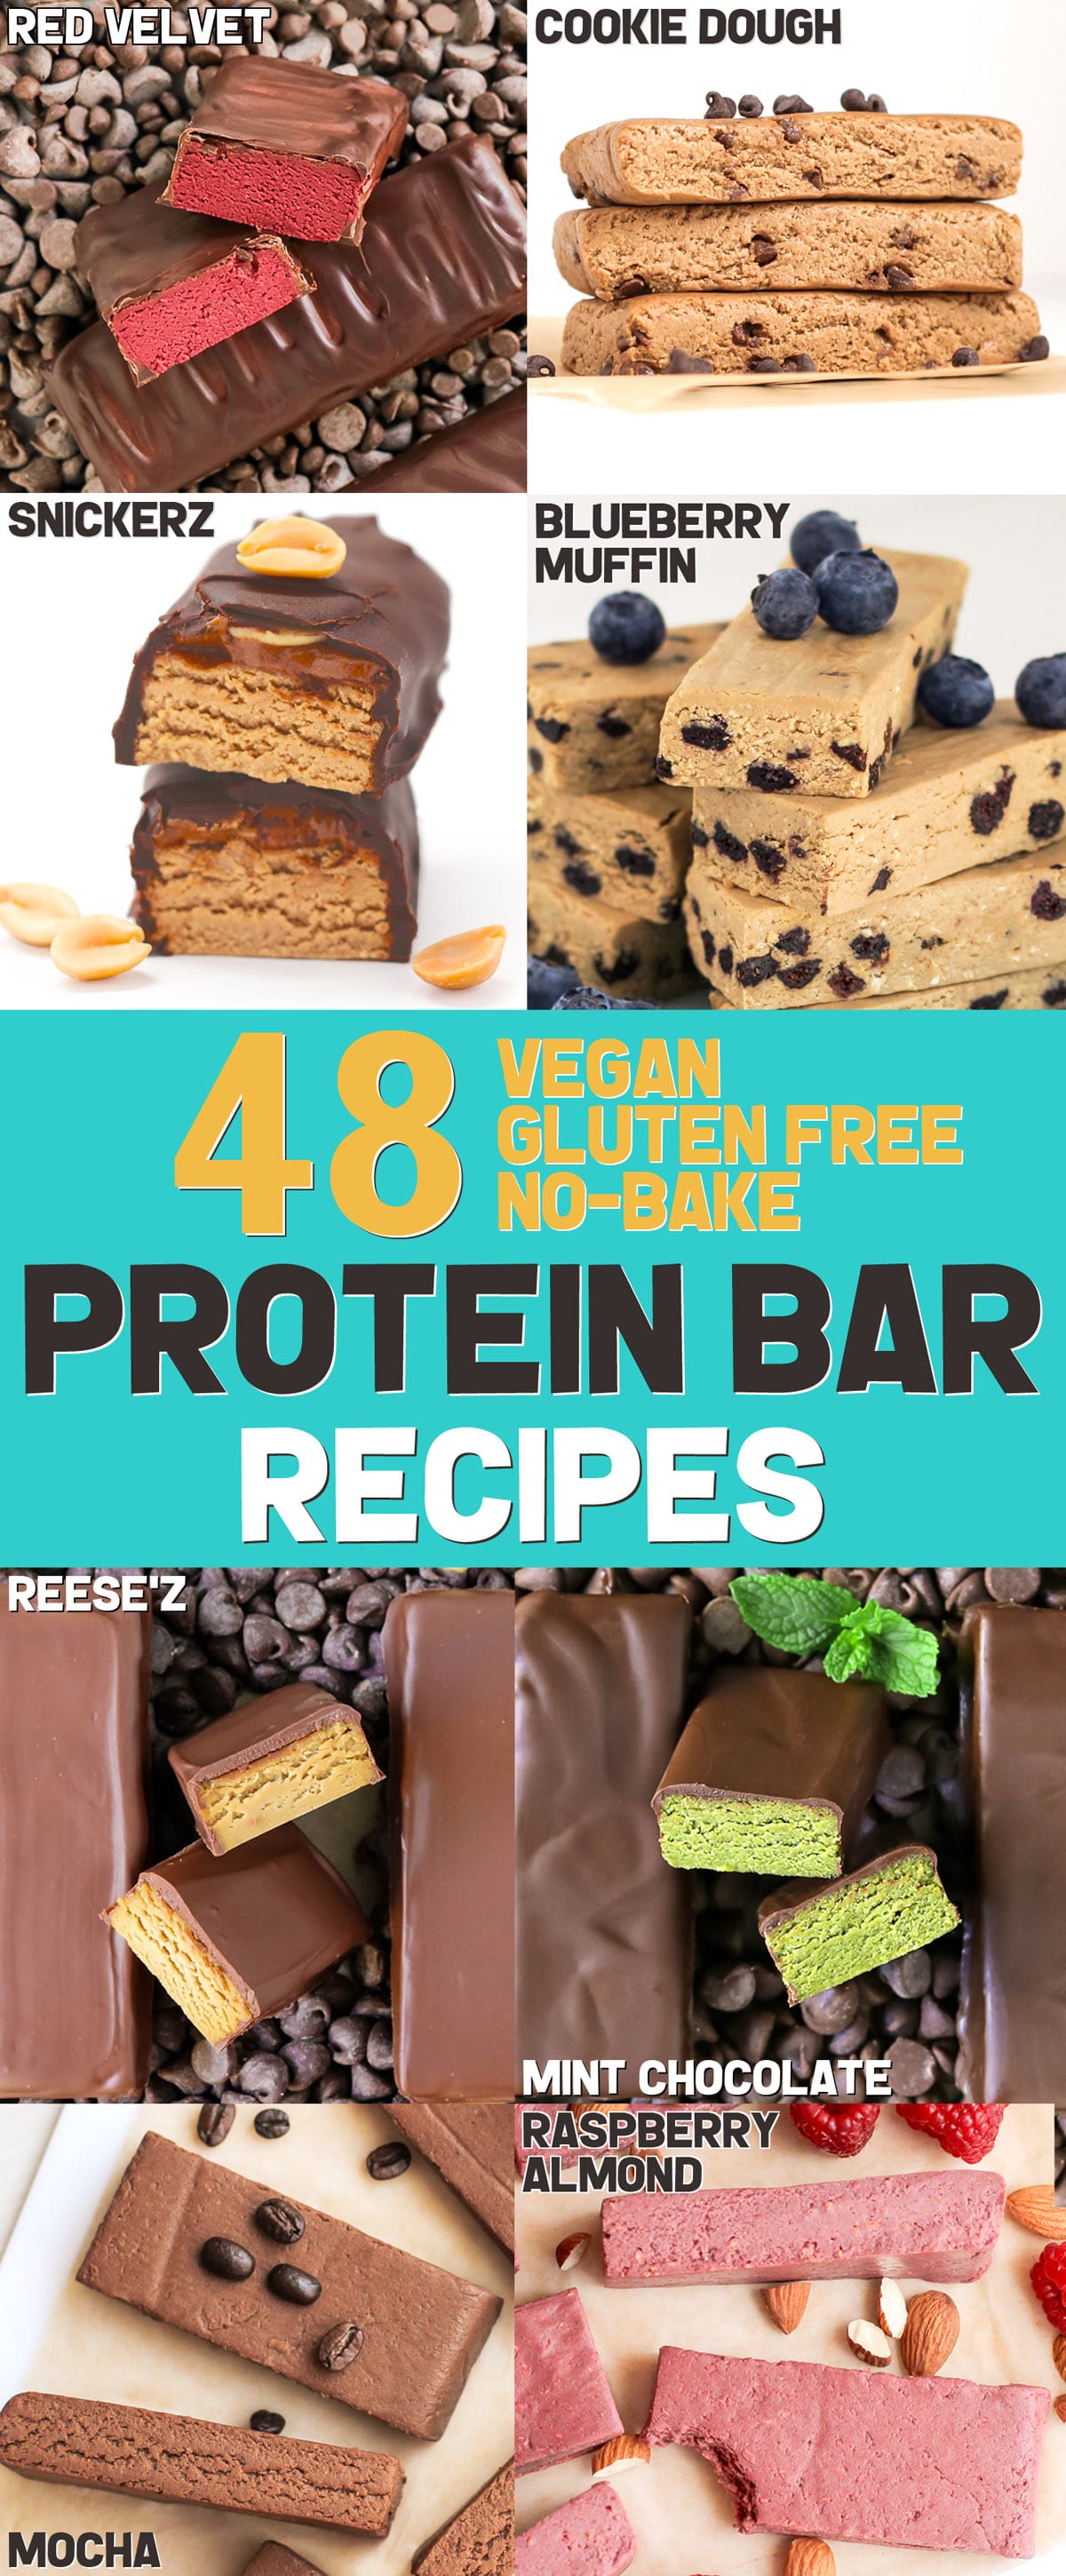 Tired of shelling out cash for protein bars at the store? Make 'em at home with The DIY Protein Bars Cookbook -- a collection of 48 healthy no-bake protein bars recipes to satisfy your sweet tooth! The recipes are gluten-free, dairy-free, soy-free, vegan, and all-natural too!